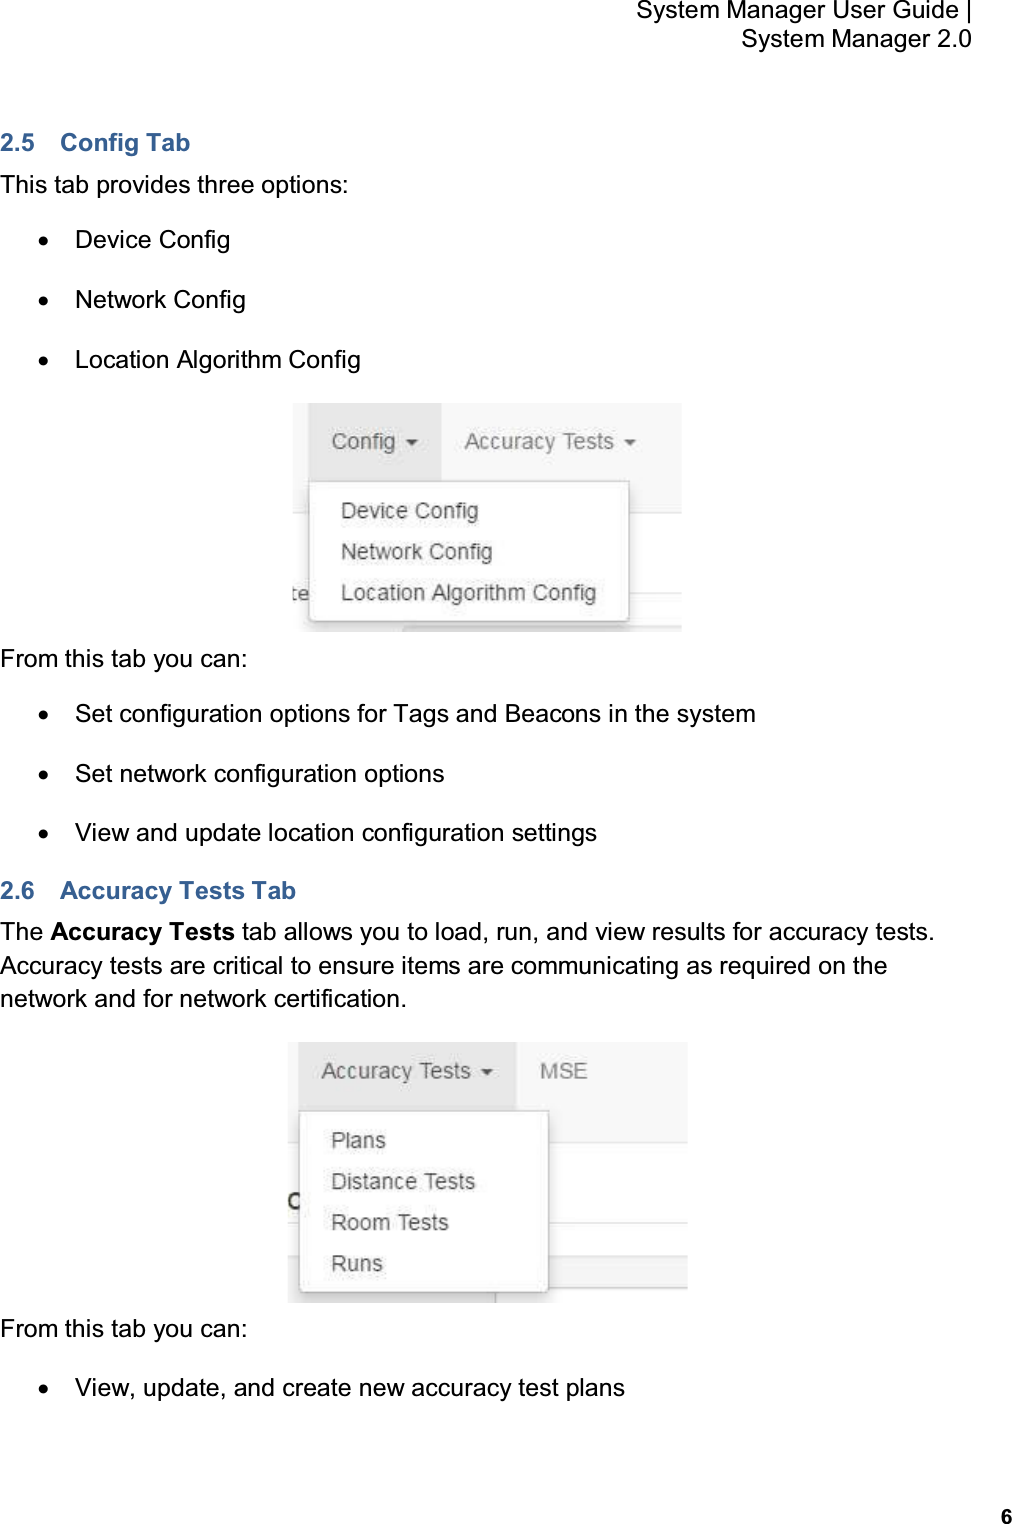           6 System Manager User Guide |  System Manager 2.0 2.5  Config Tab This tab provides three options: •  Device Config •  Network Config •  Location Algorithm Config  From this tab you can: •  Set configuration options for Tags and Beacons in the system •  Set network configuration options •  View and update location configuration settings 2.6  Accuracy Tests Tab The Accuracy Tests tab allows you to load, run, and view results for accuracy tests.  Accuracy tests are critical to ensure items are communicating as required on the network and for network certification.  From this tab you can: •  View, update, and create new accuracy test plans 